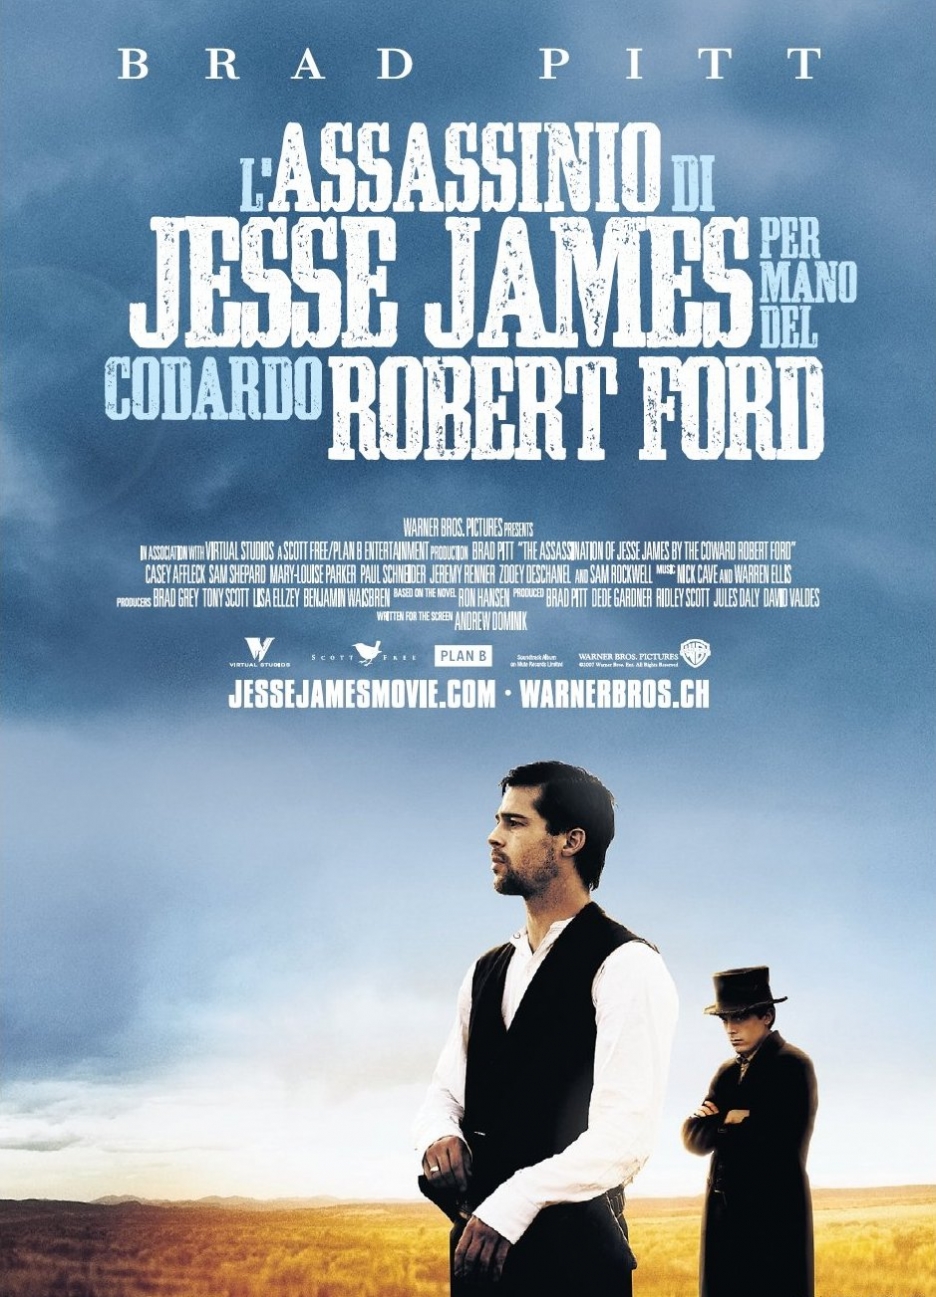 Aero Theatre Presents: The Assassination of Jesse James by The Coward Robert Ford